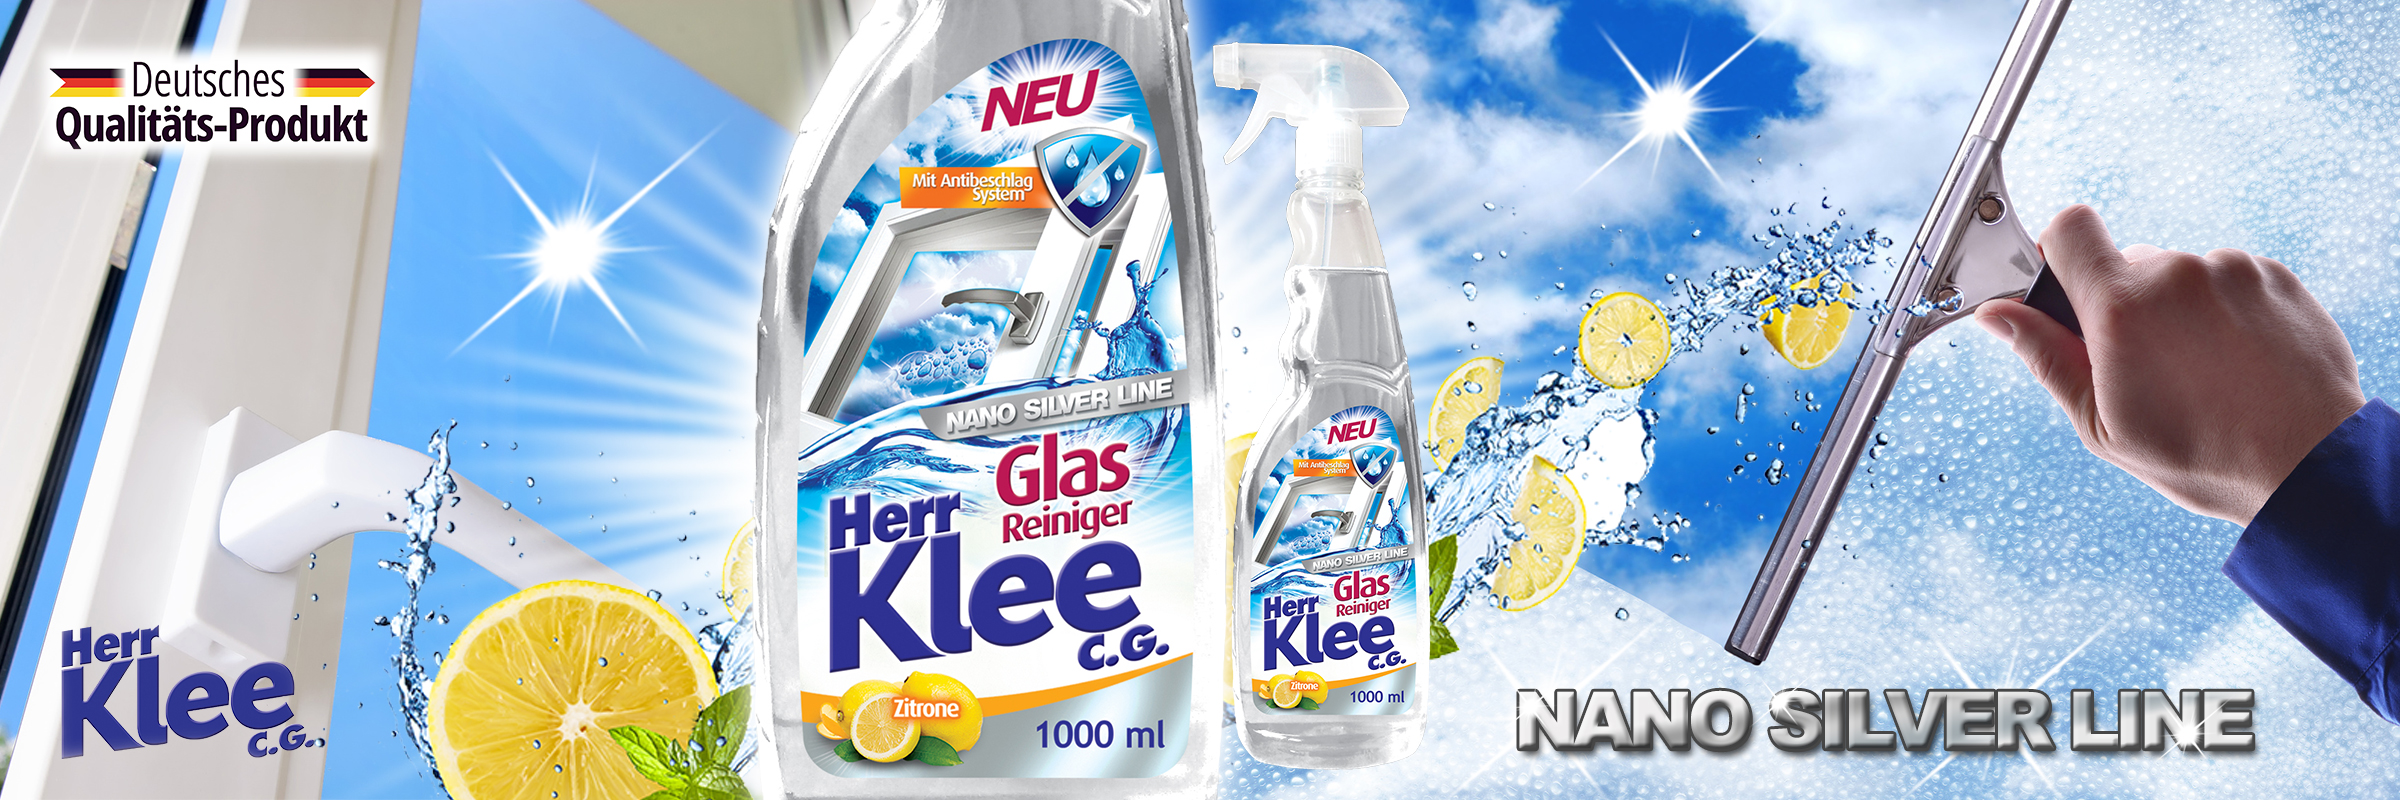 New glass liquid Herr Klee with anti-steam system